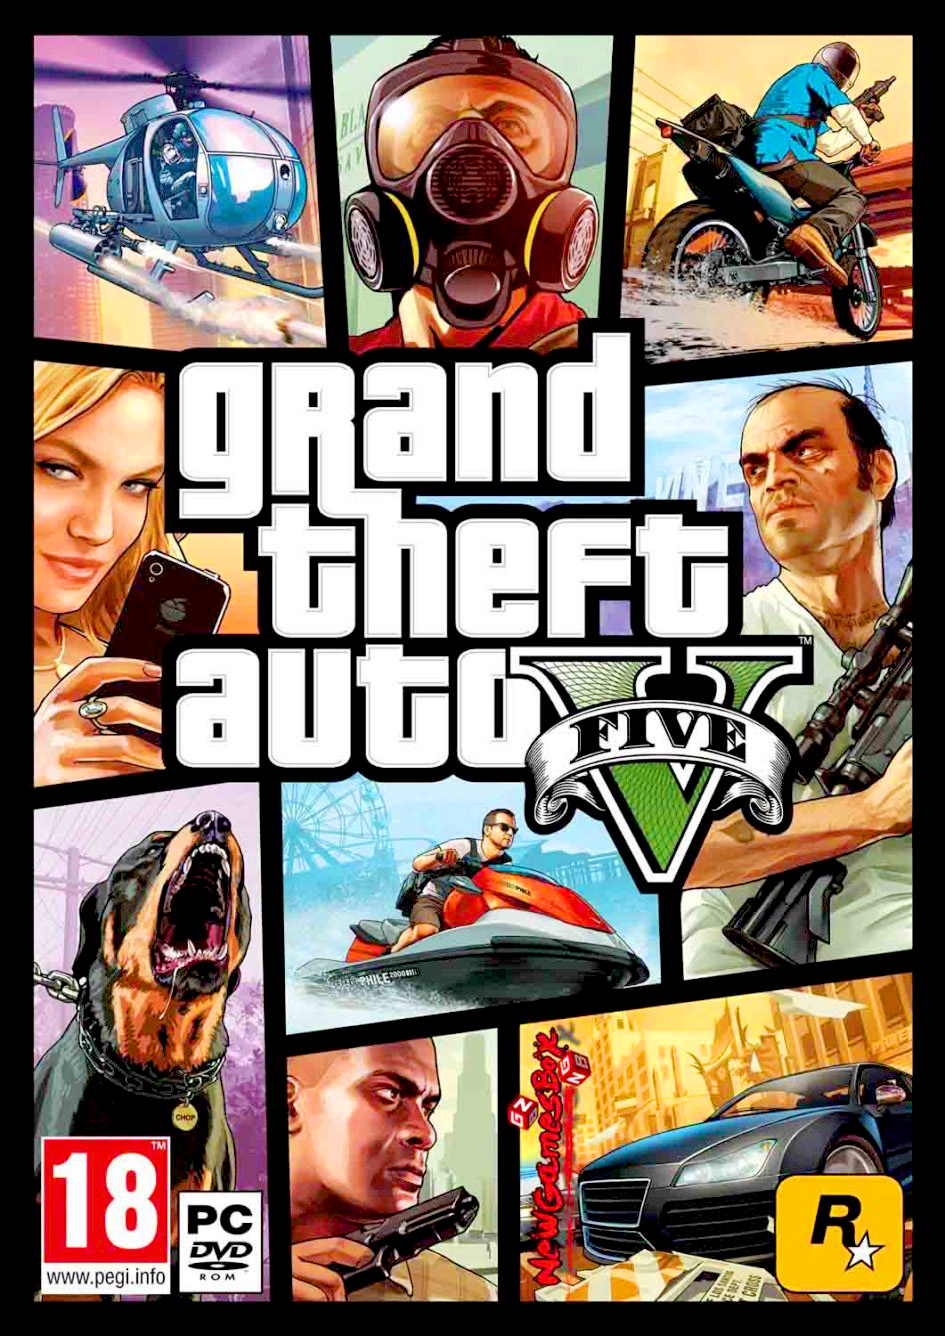 gta 5free highly compressed for pc by mega